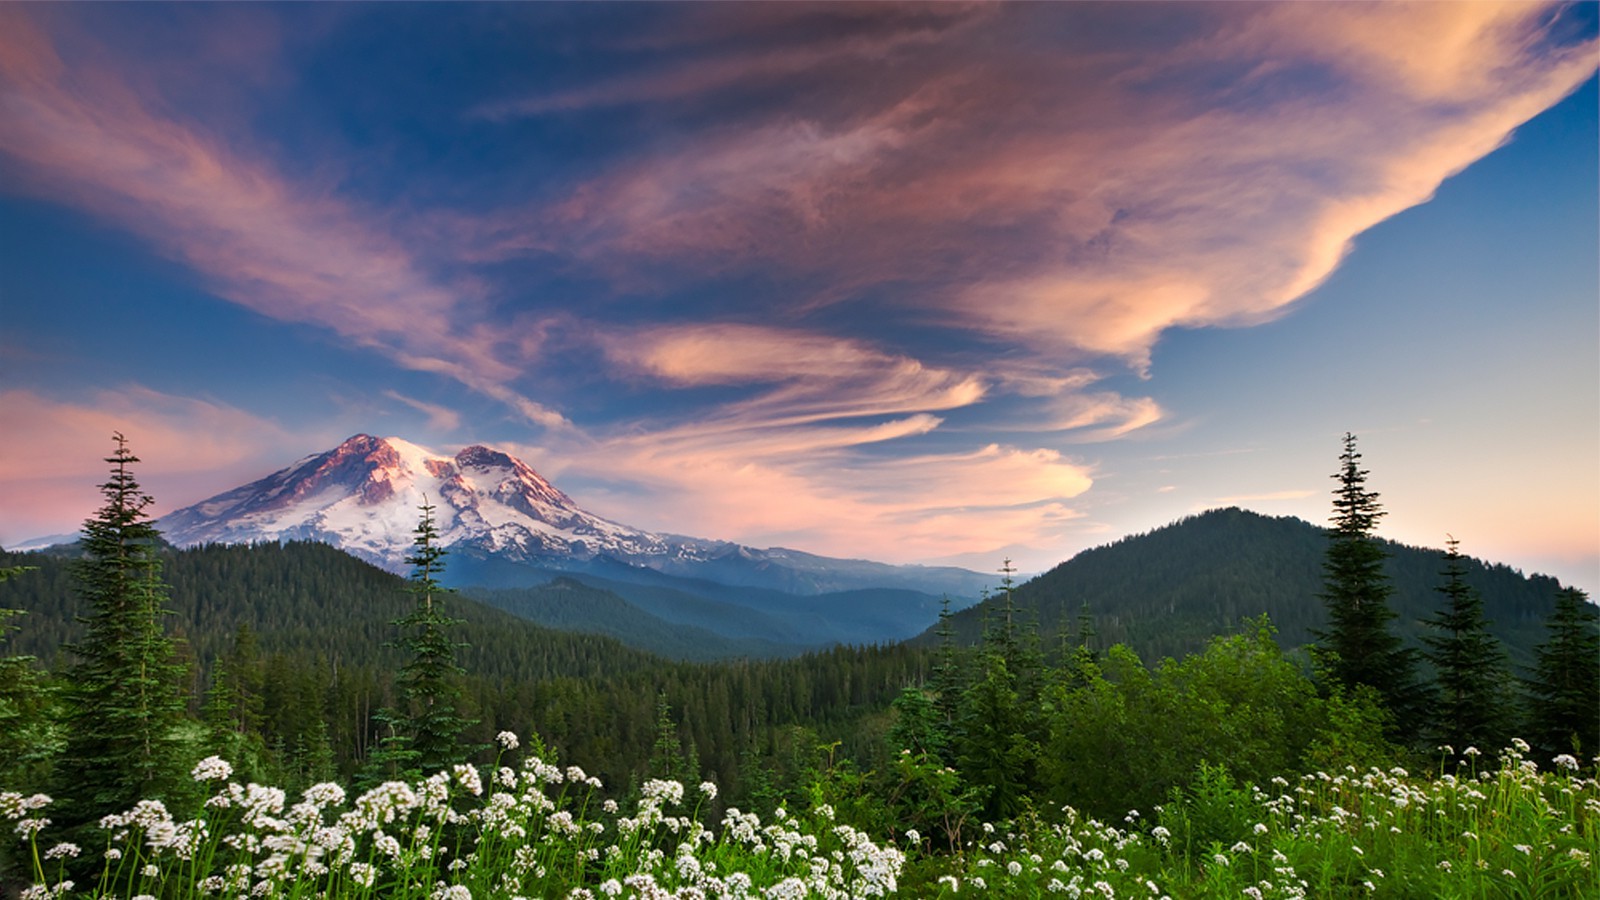 wildflowers, Forest, Mountain, Sunset, Clouds, Snowy Peak, Nature, Landscape Wallpaper